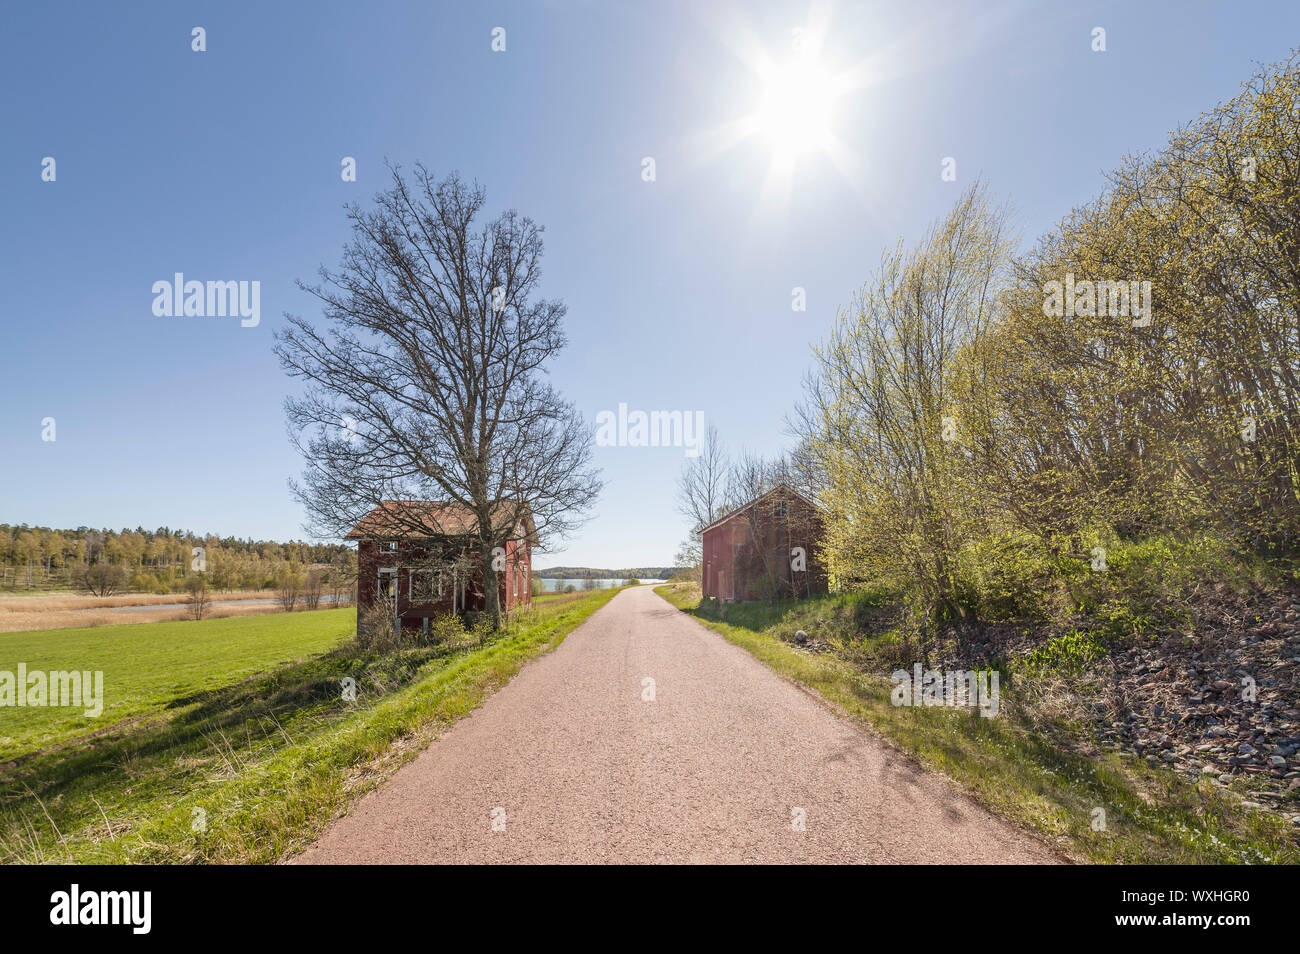 An old abandoned house and road in a rural countryside landscape. Aland Islands, Finland. Stock Photo